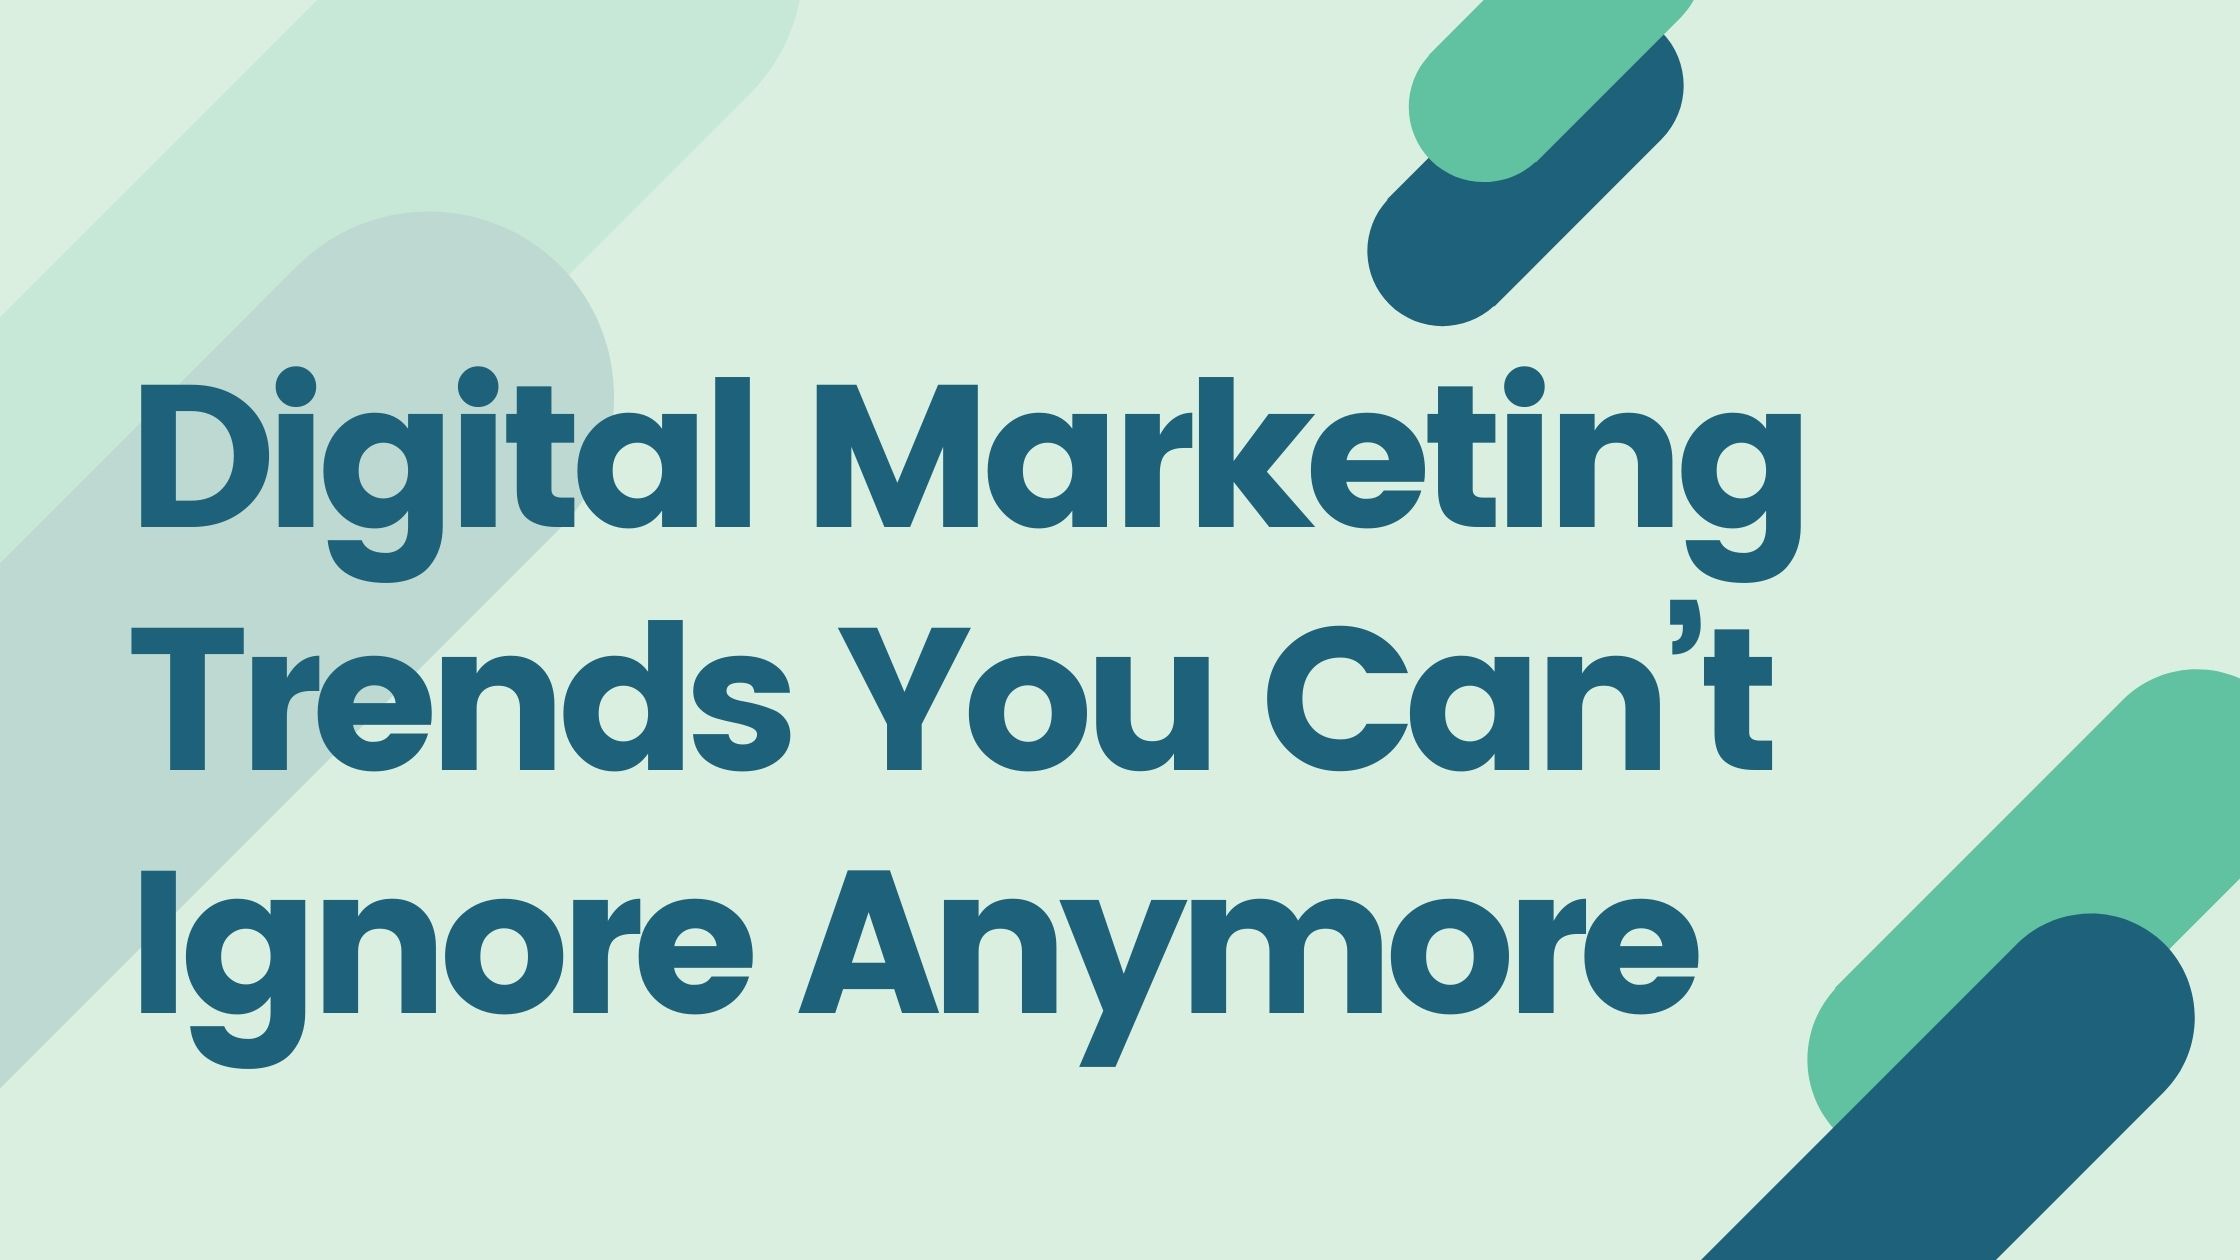 Digital Marketing Trends You Can’t Ignore Anymore